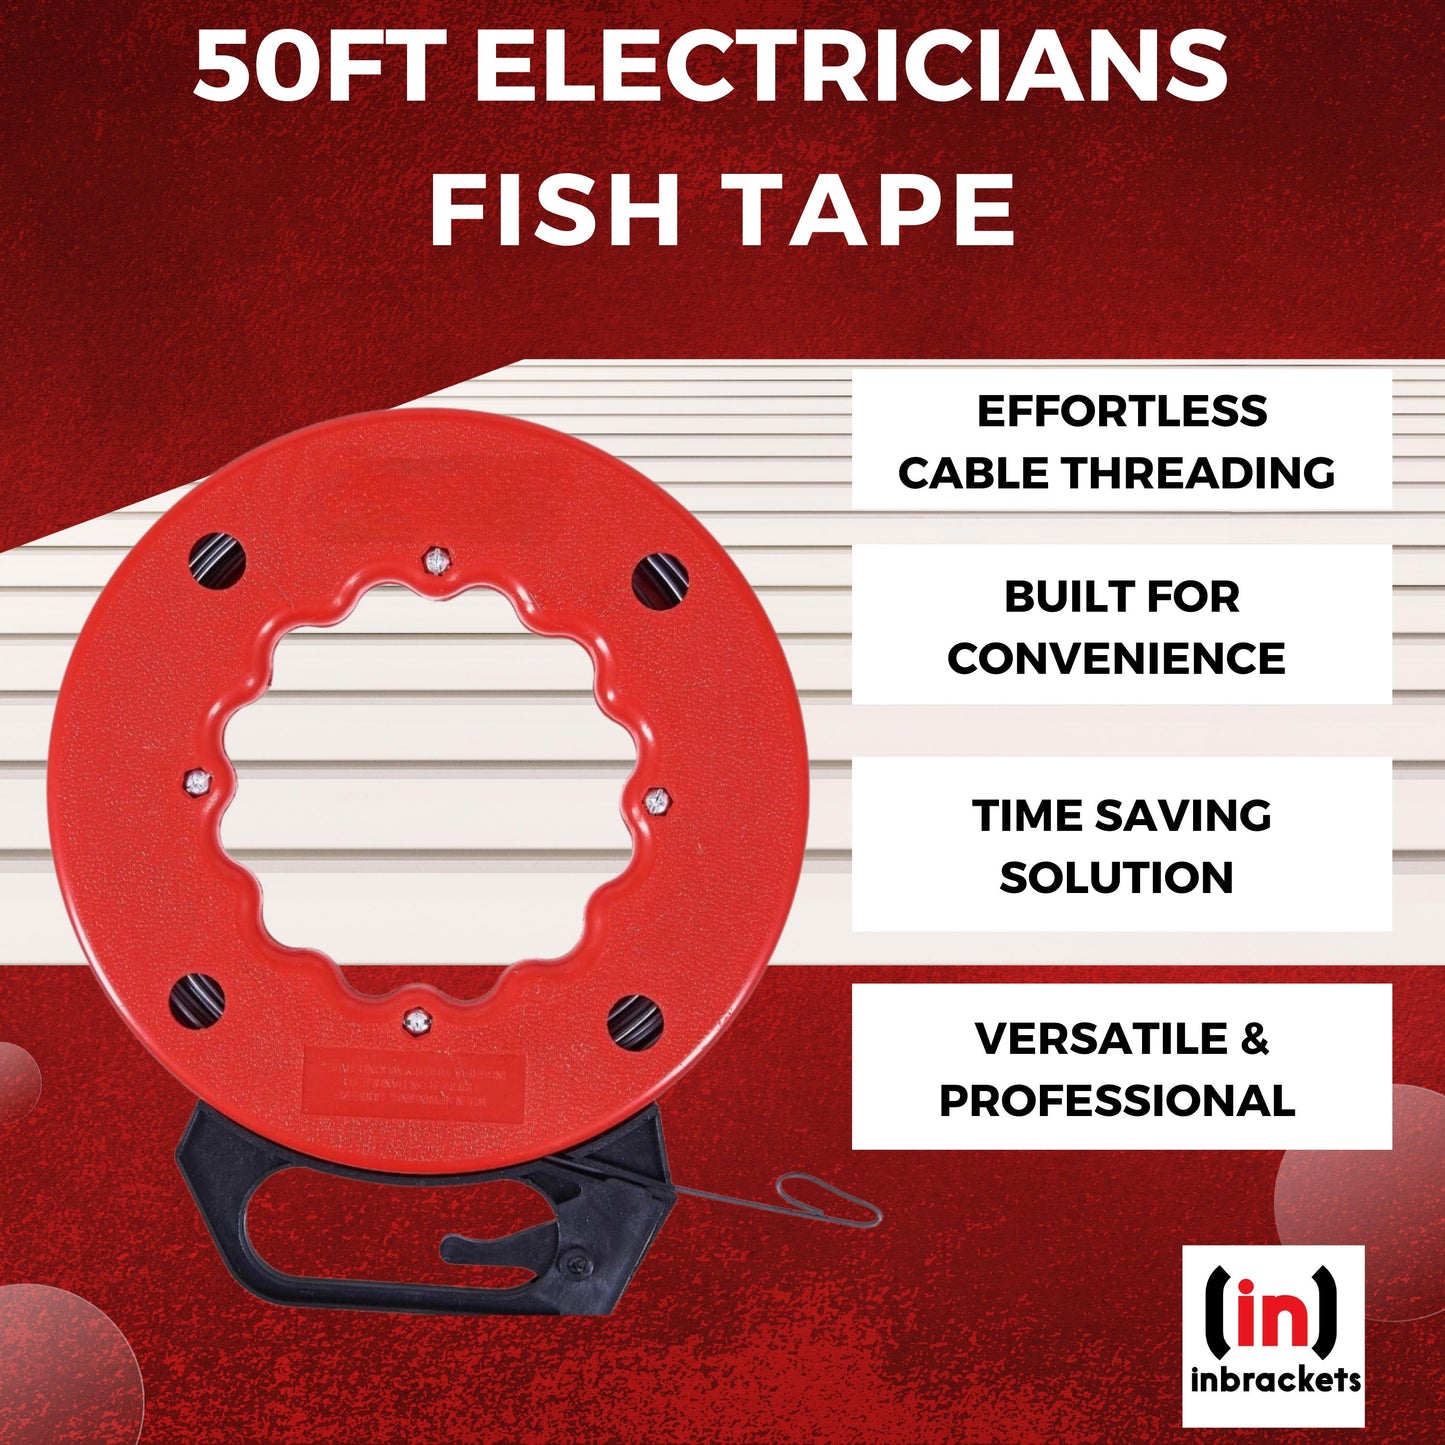 50FT Electrician's Fish Tape: Effortless Cable & Wire Access in Conduits and Drywalls